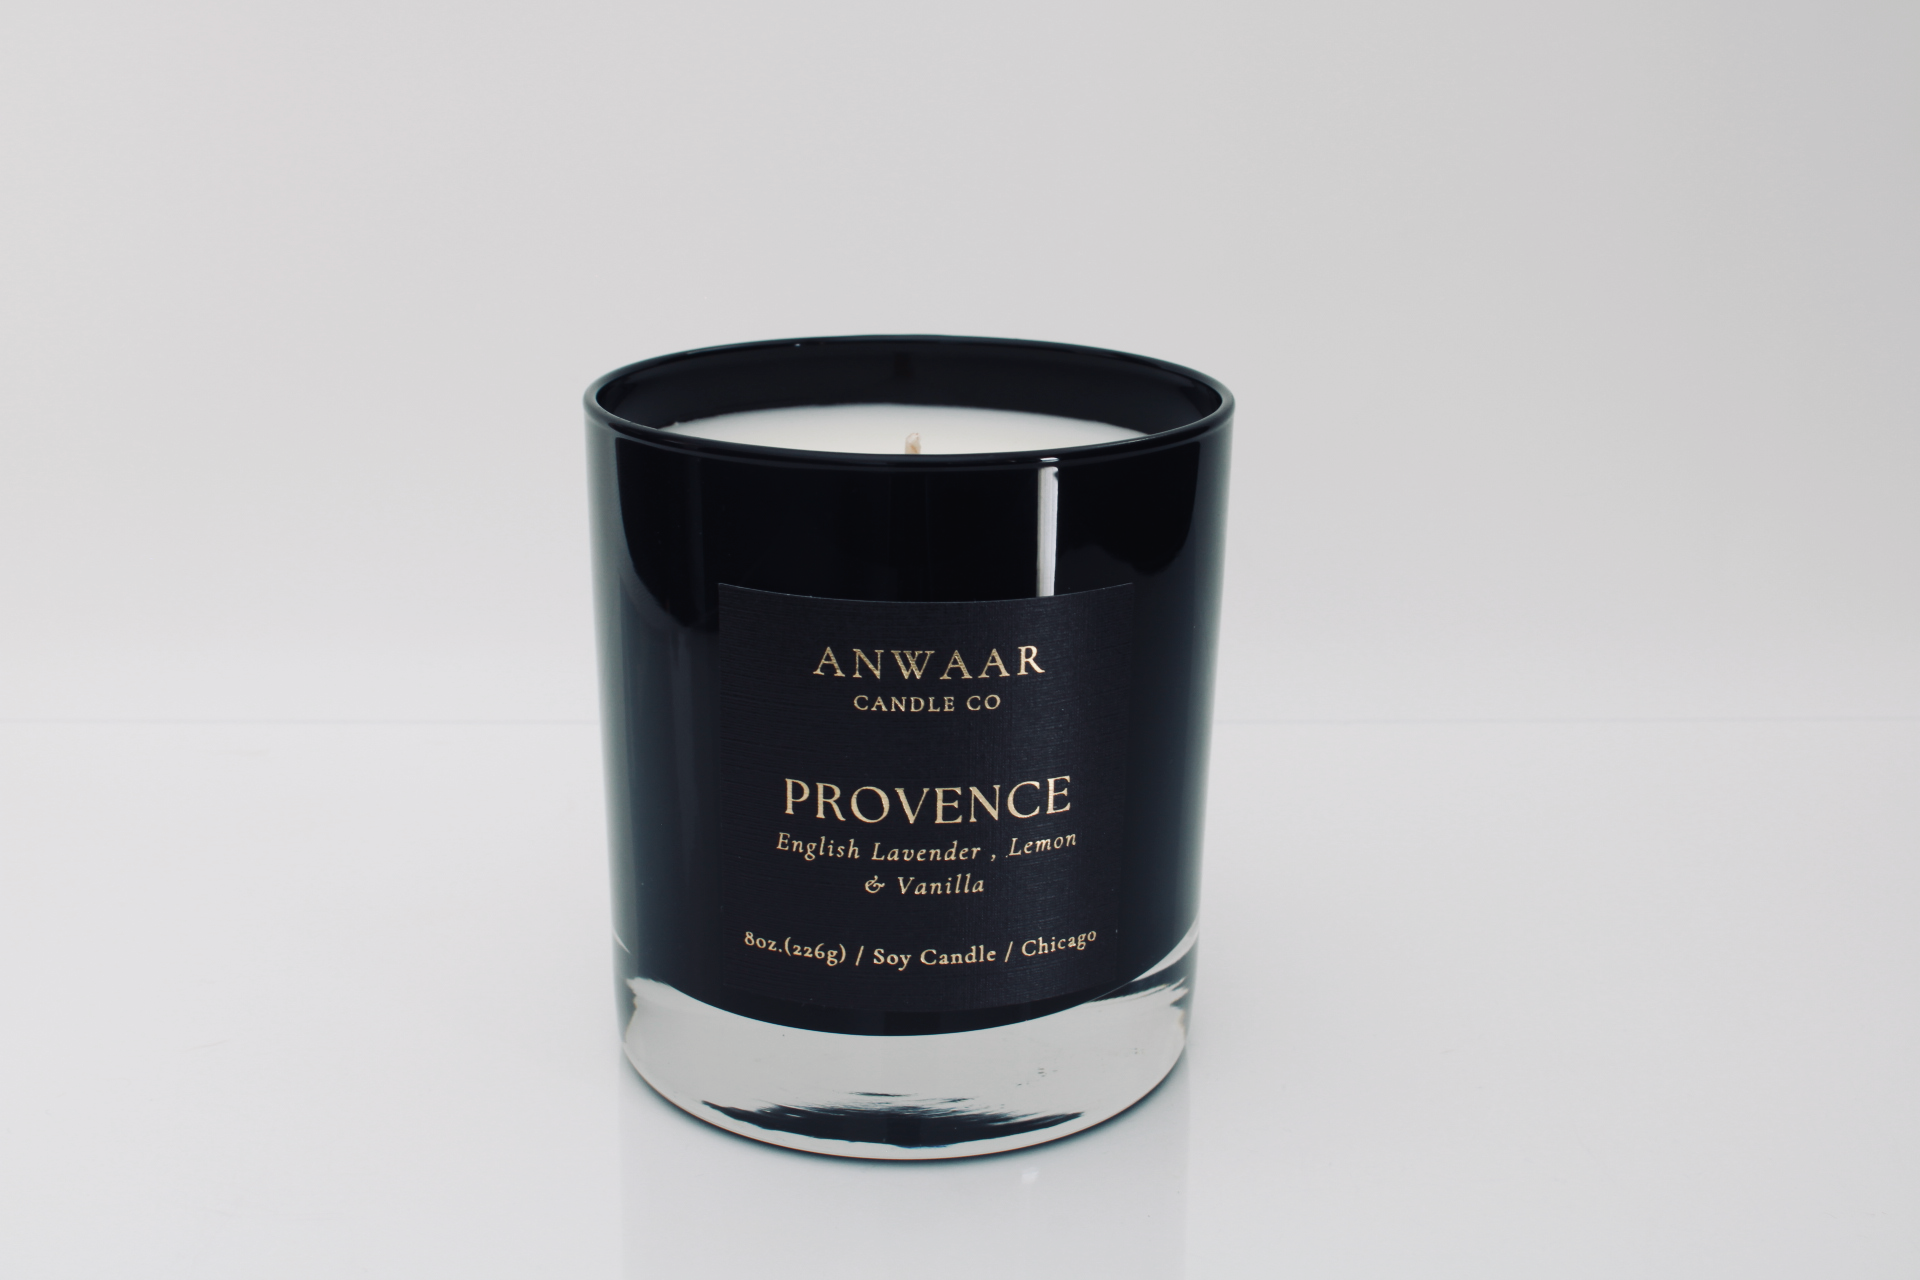 Provence - black elegant candle vessel with black label and gold letters with details about the product 